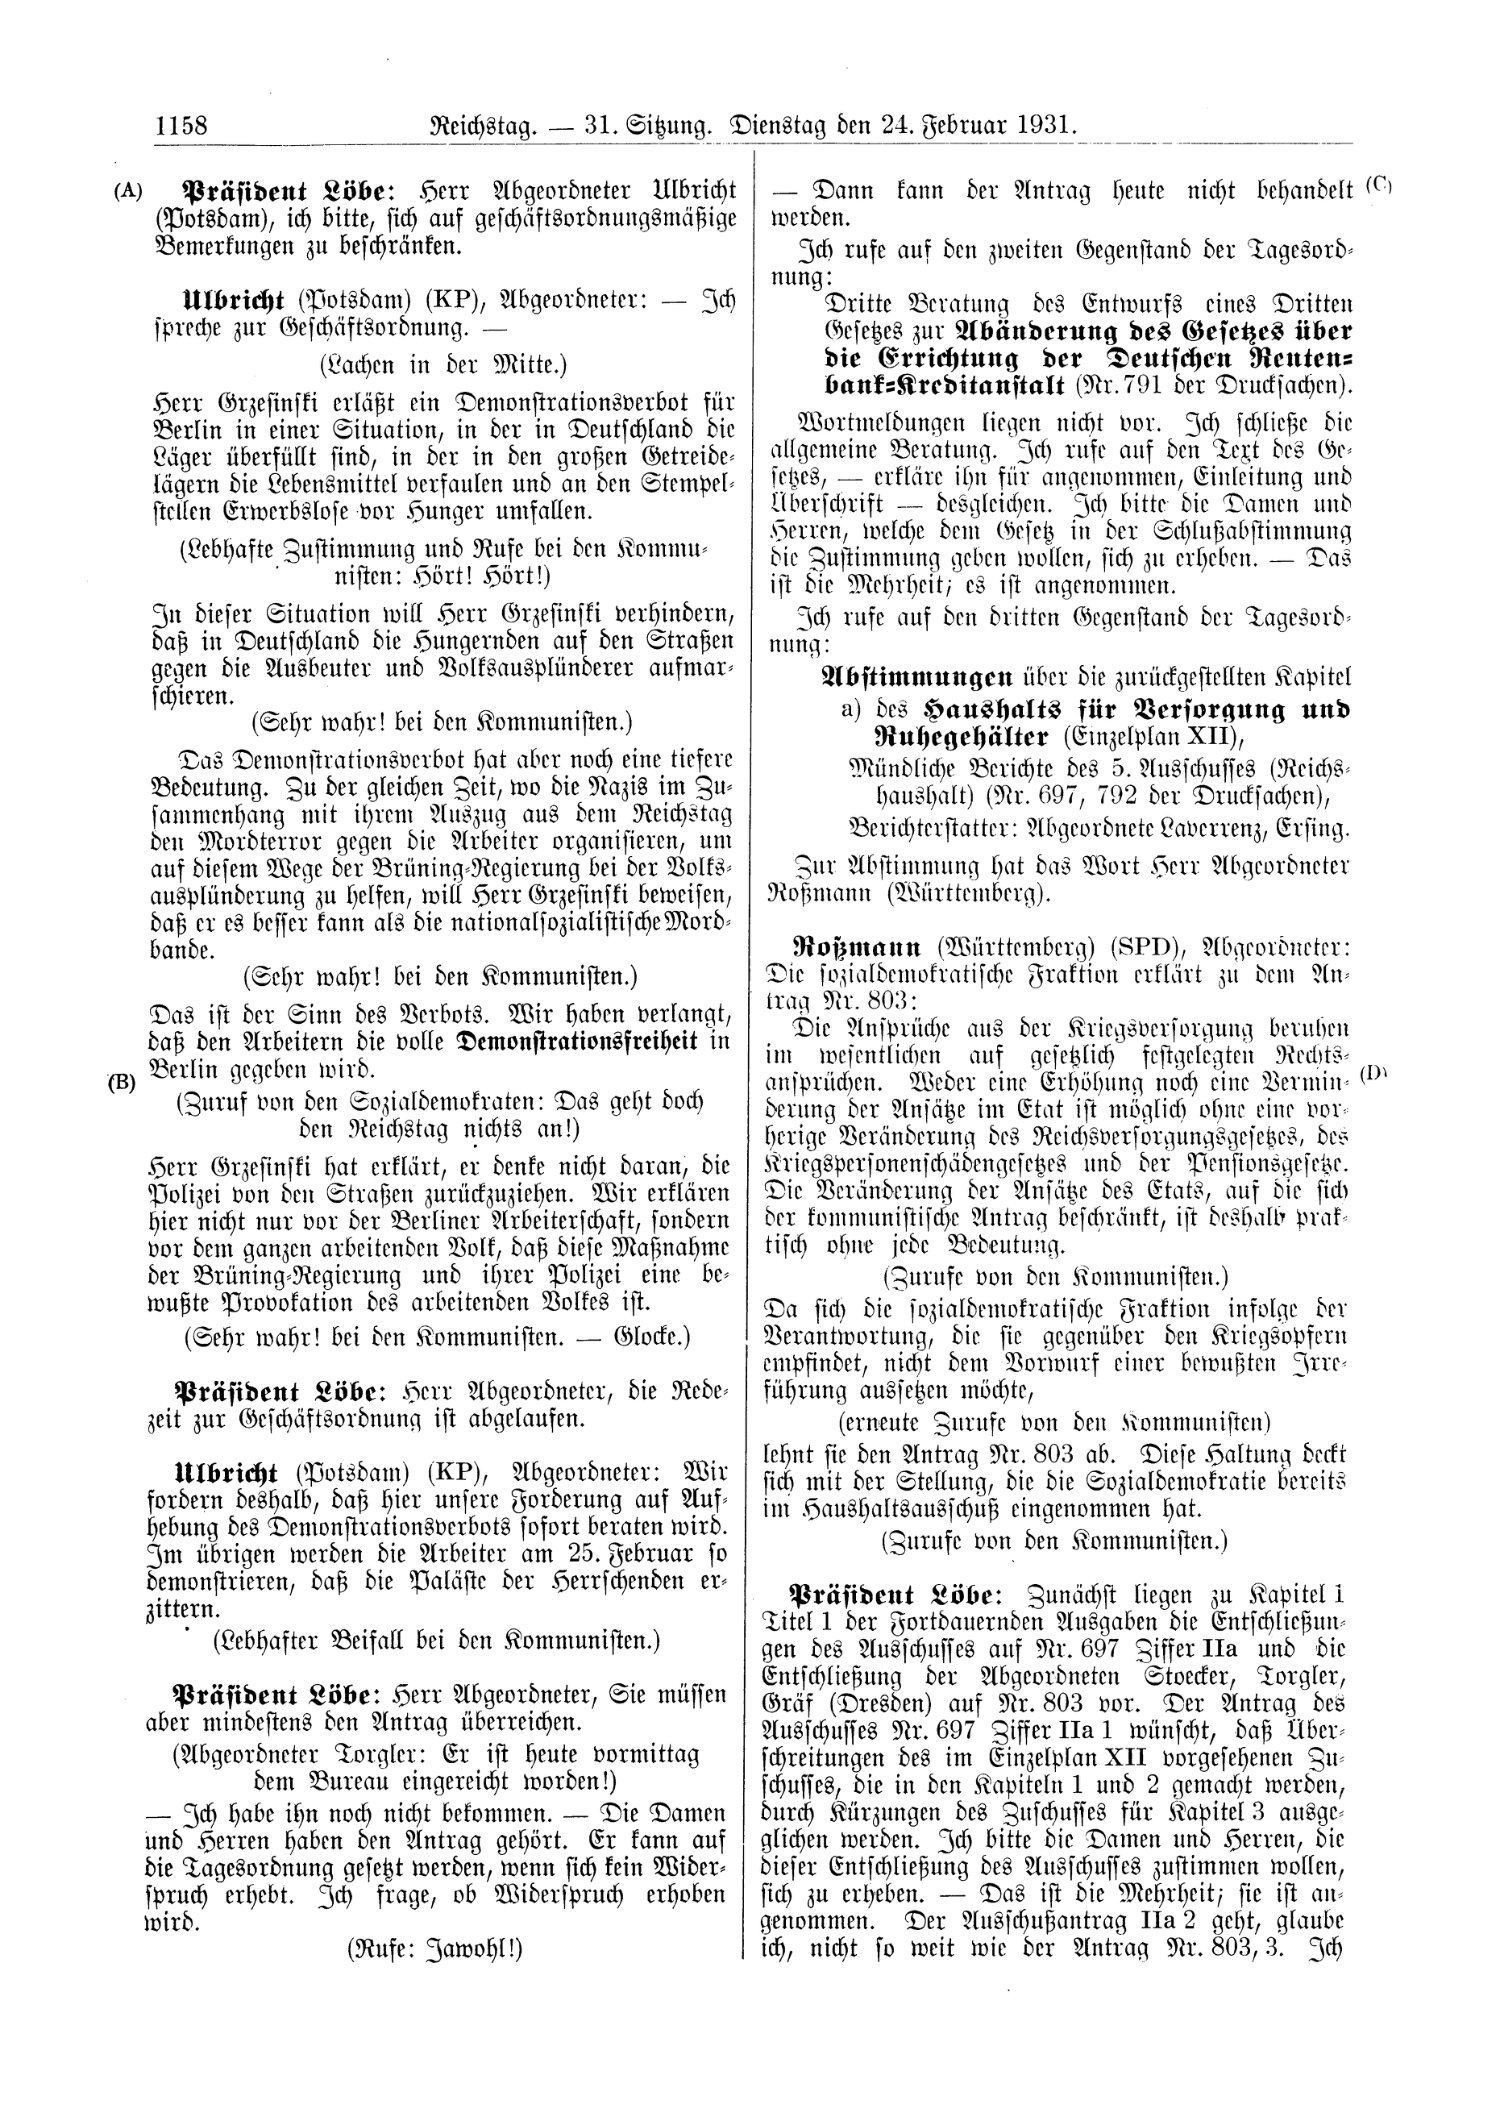 Scan of page 1158